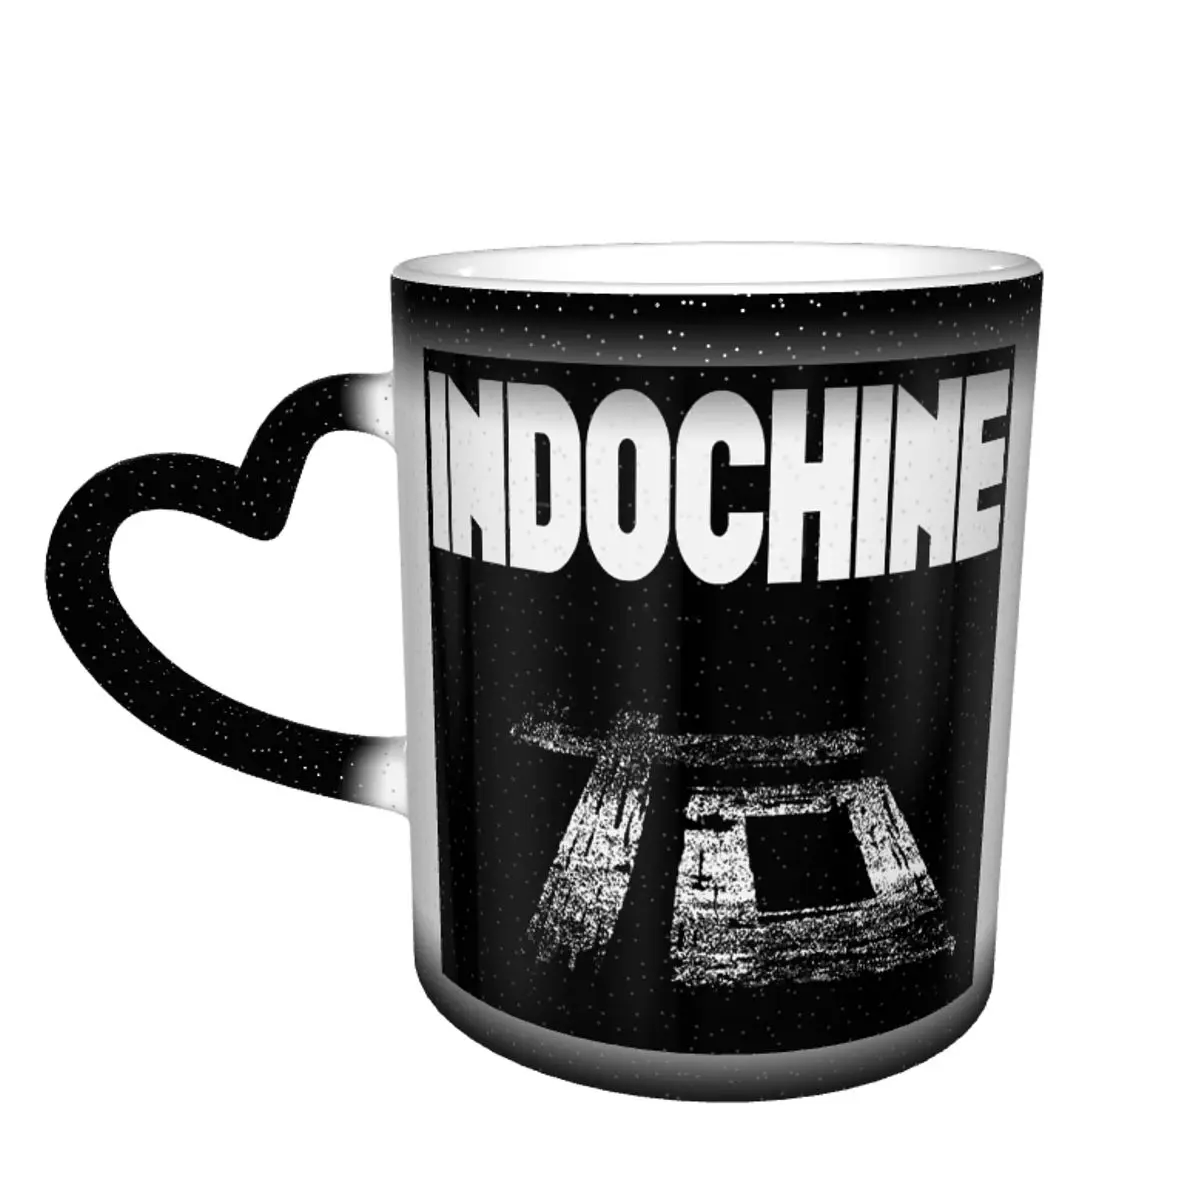 

Indochine Central Tour 2020 2021 Color Changing Mug in the Sky Casual Graphic Ceramic Heat-sensitive Cup Nerdy R145 Coffee cups